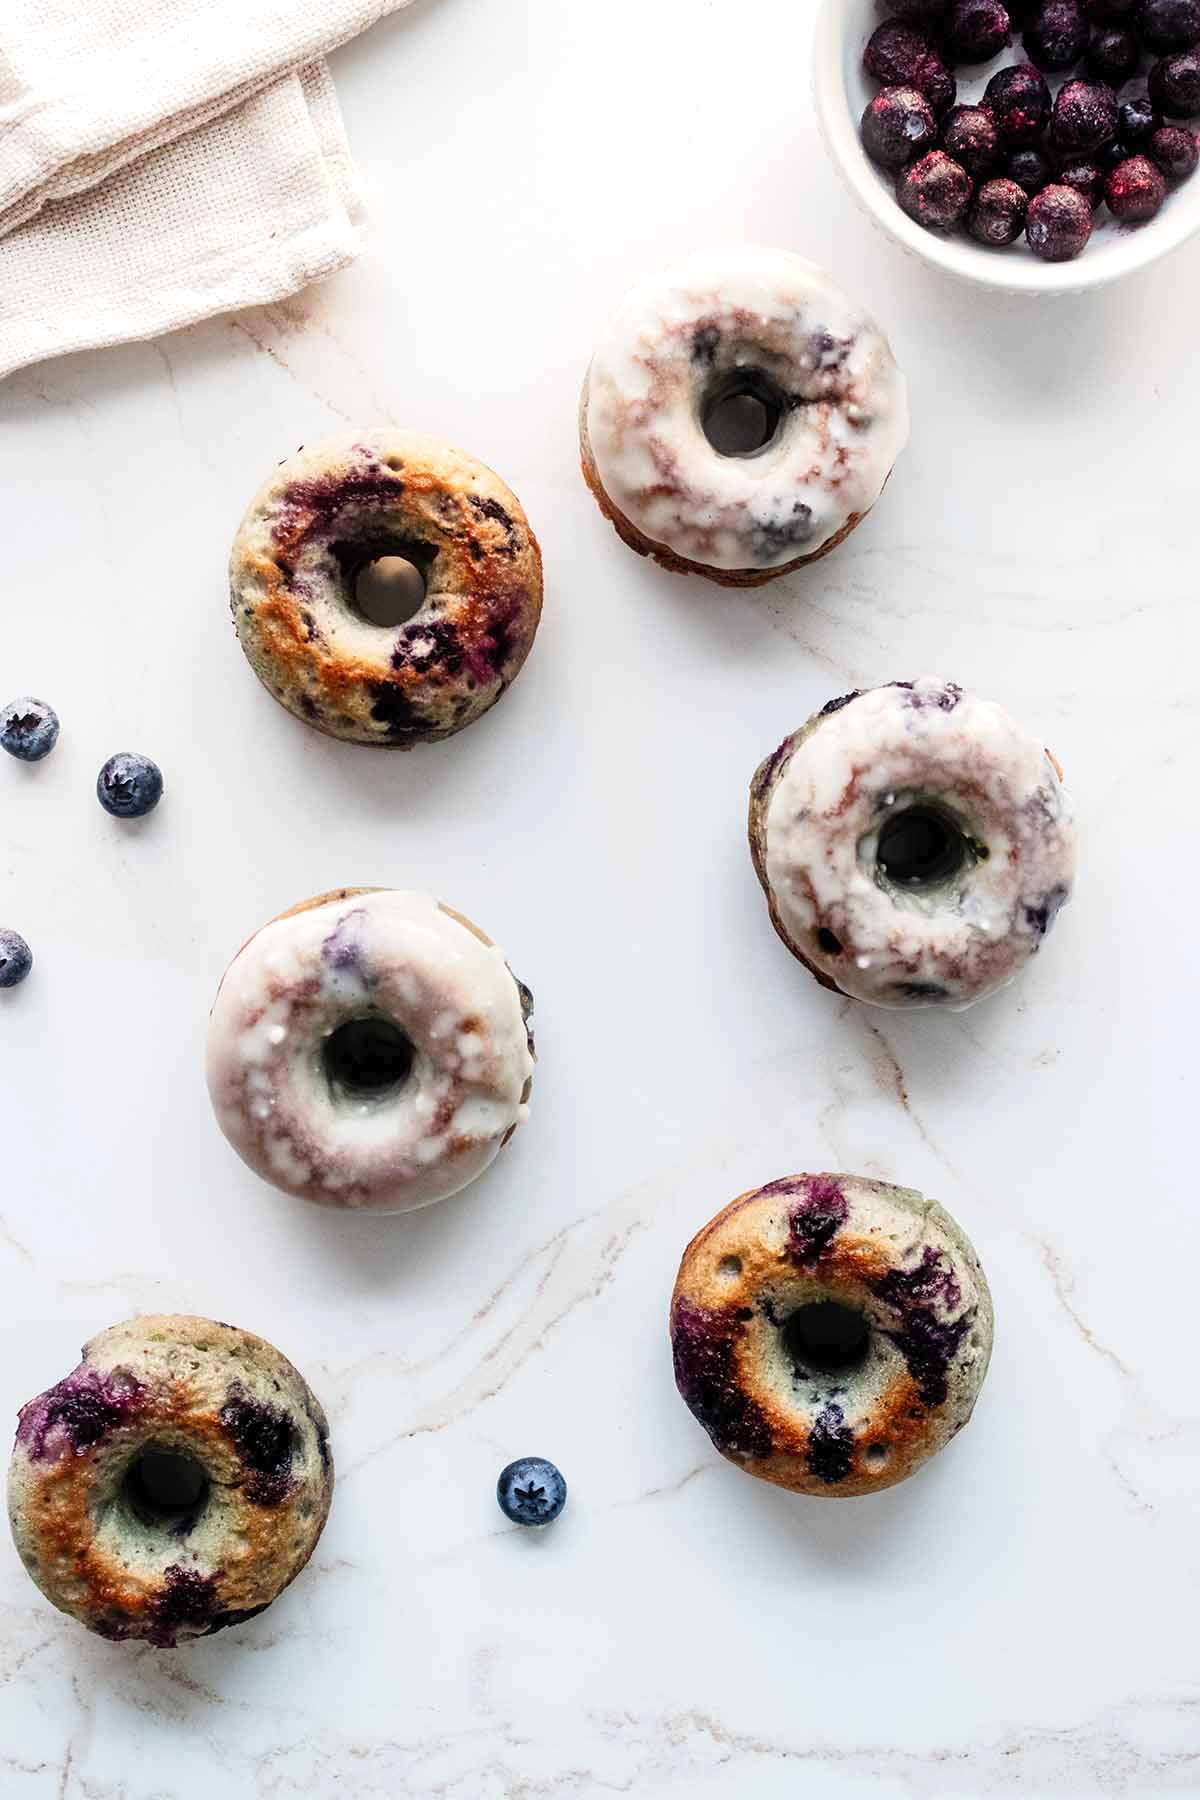 Top view of blueberry donuts on a marble surface with a bowl of blueberries and a white napkin